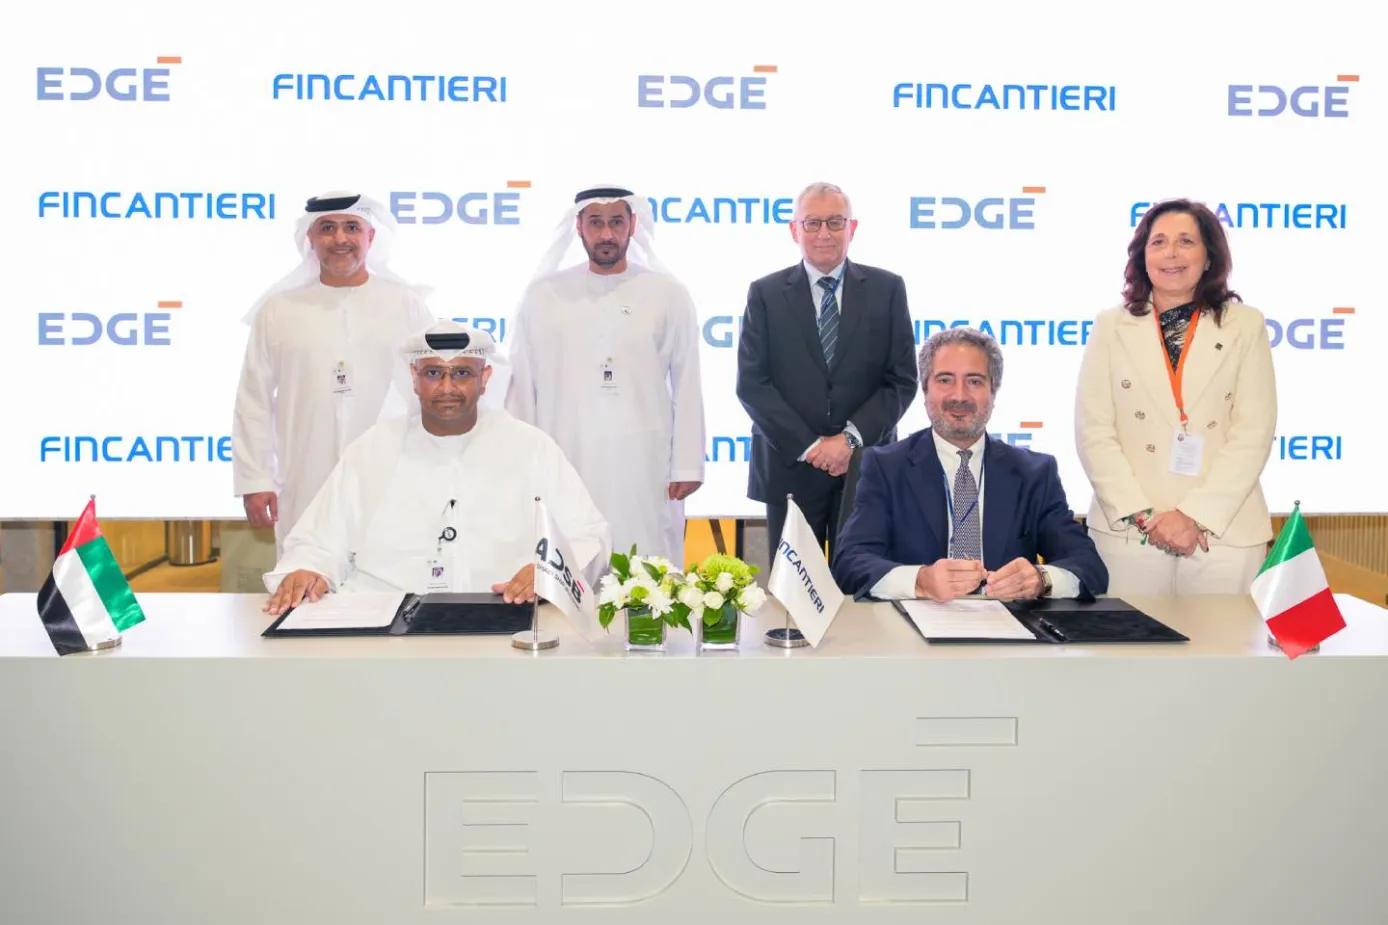  EDGE and Fincantieri Sign an Industrial Cooperation Agreement at IDEX 2023